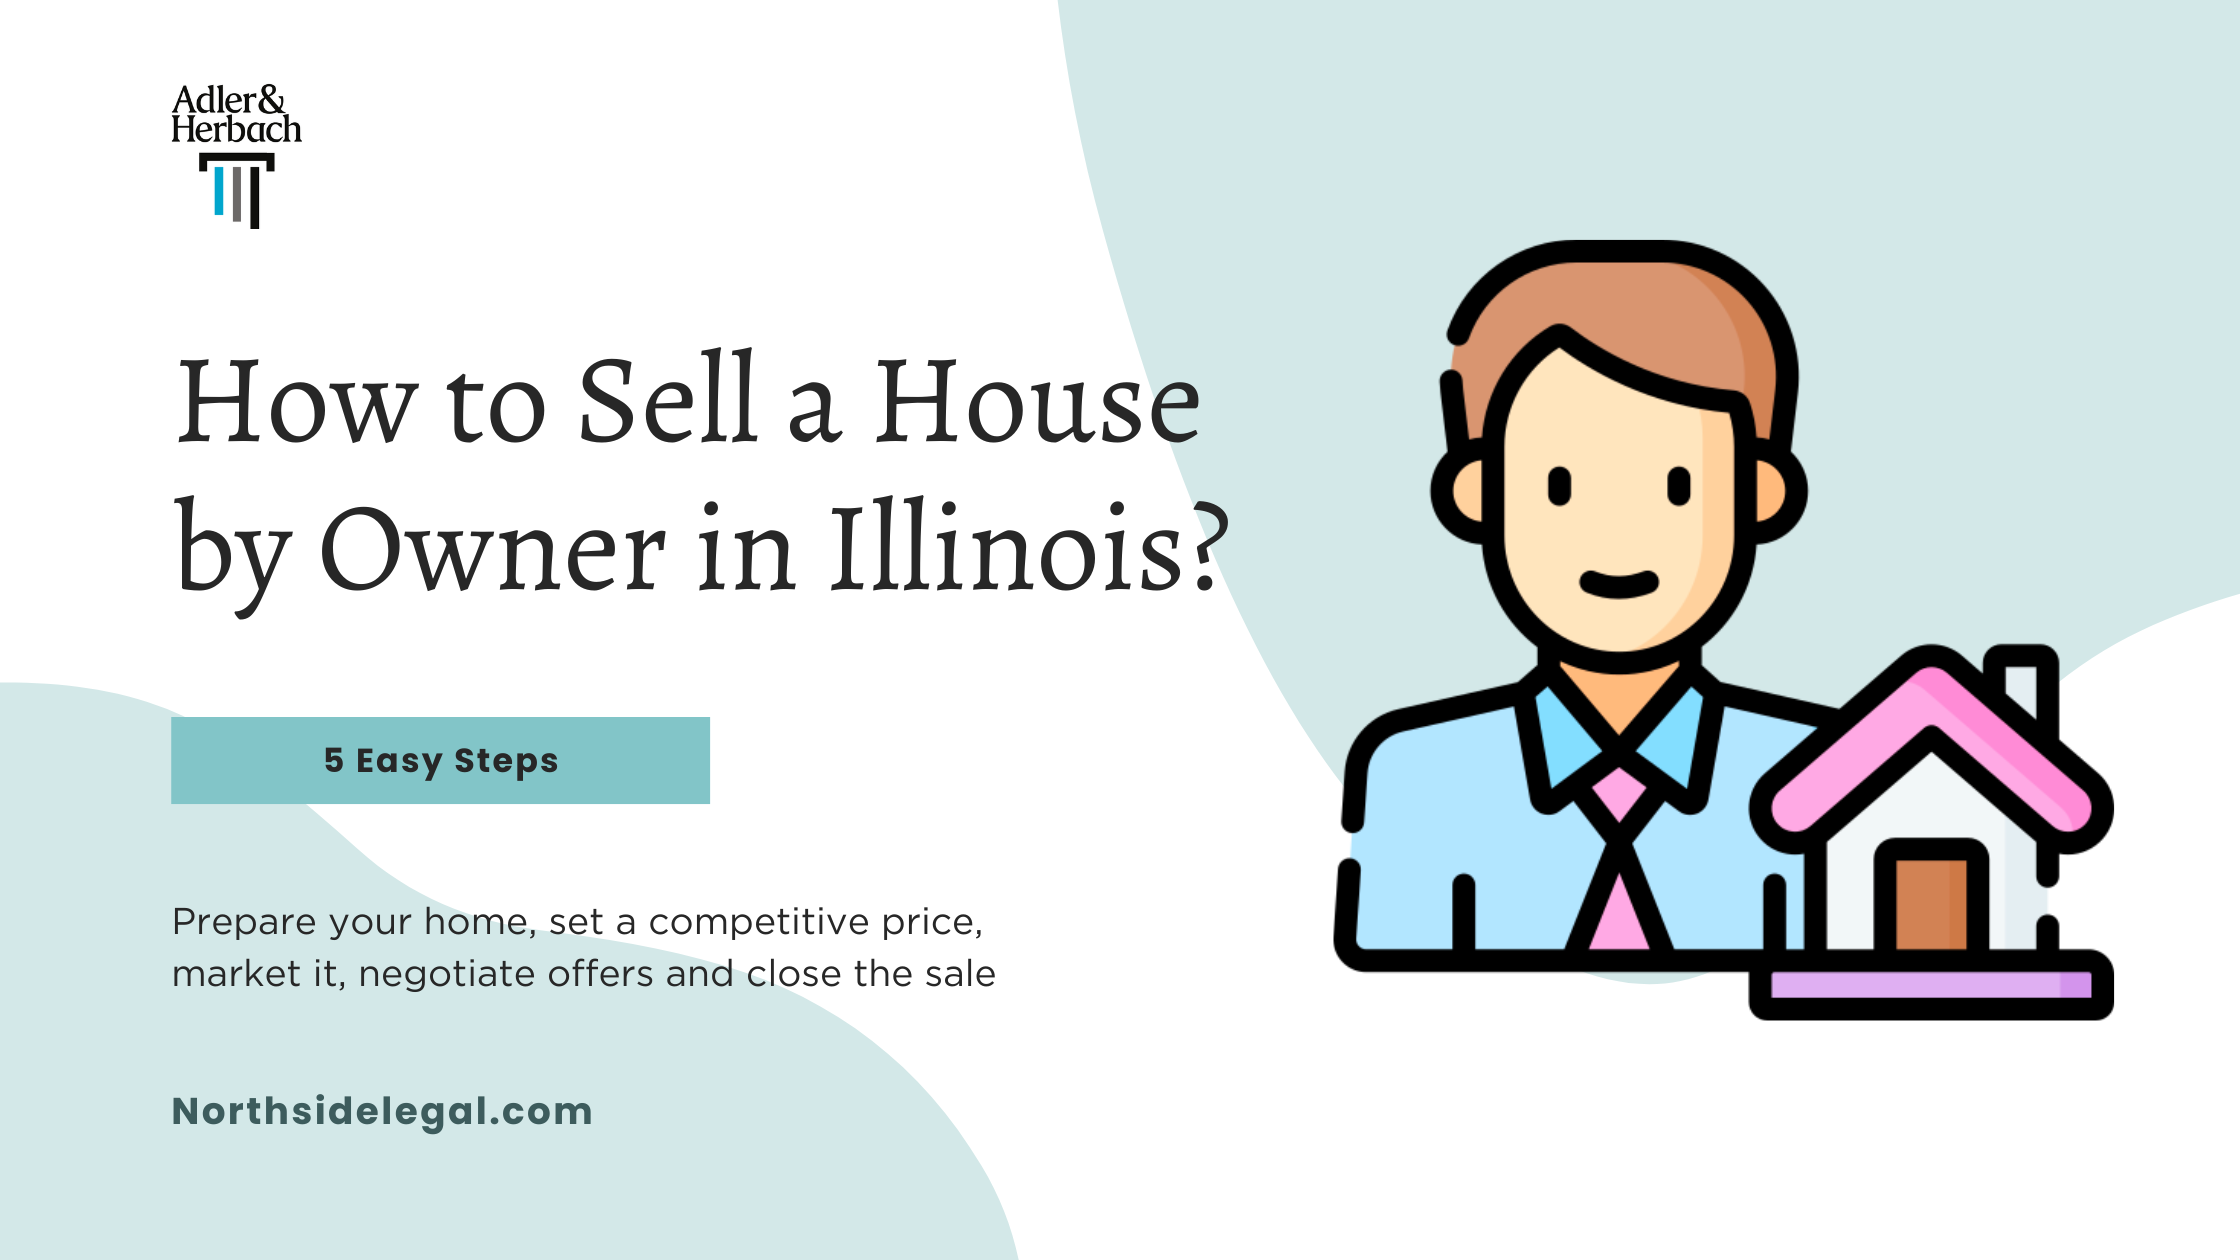 How to Sell a House by Owner (Save $26,850) in Illinois?